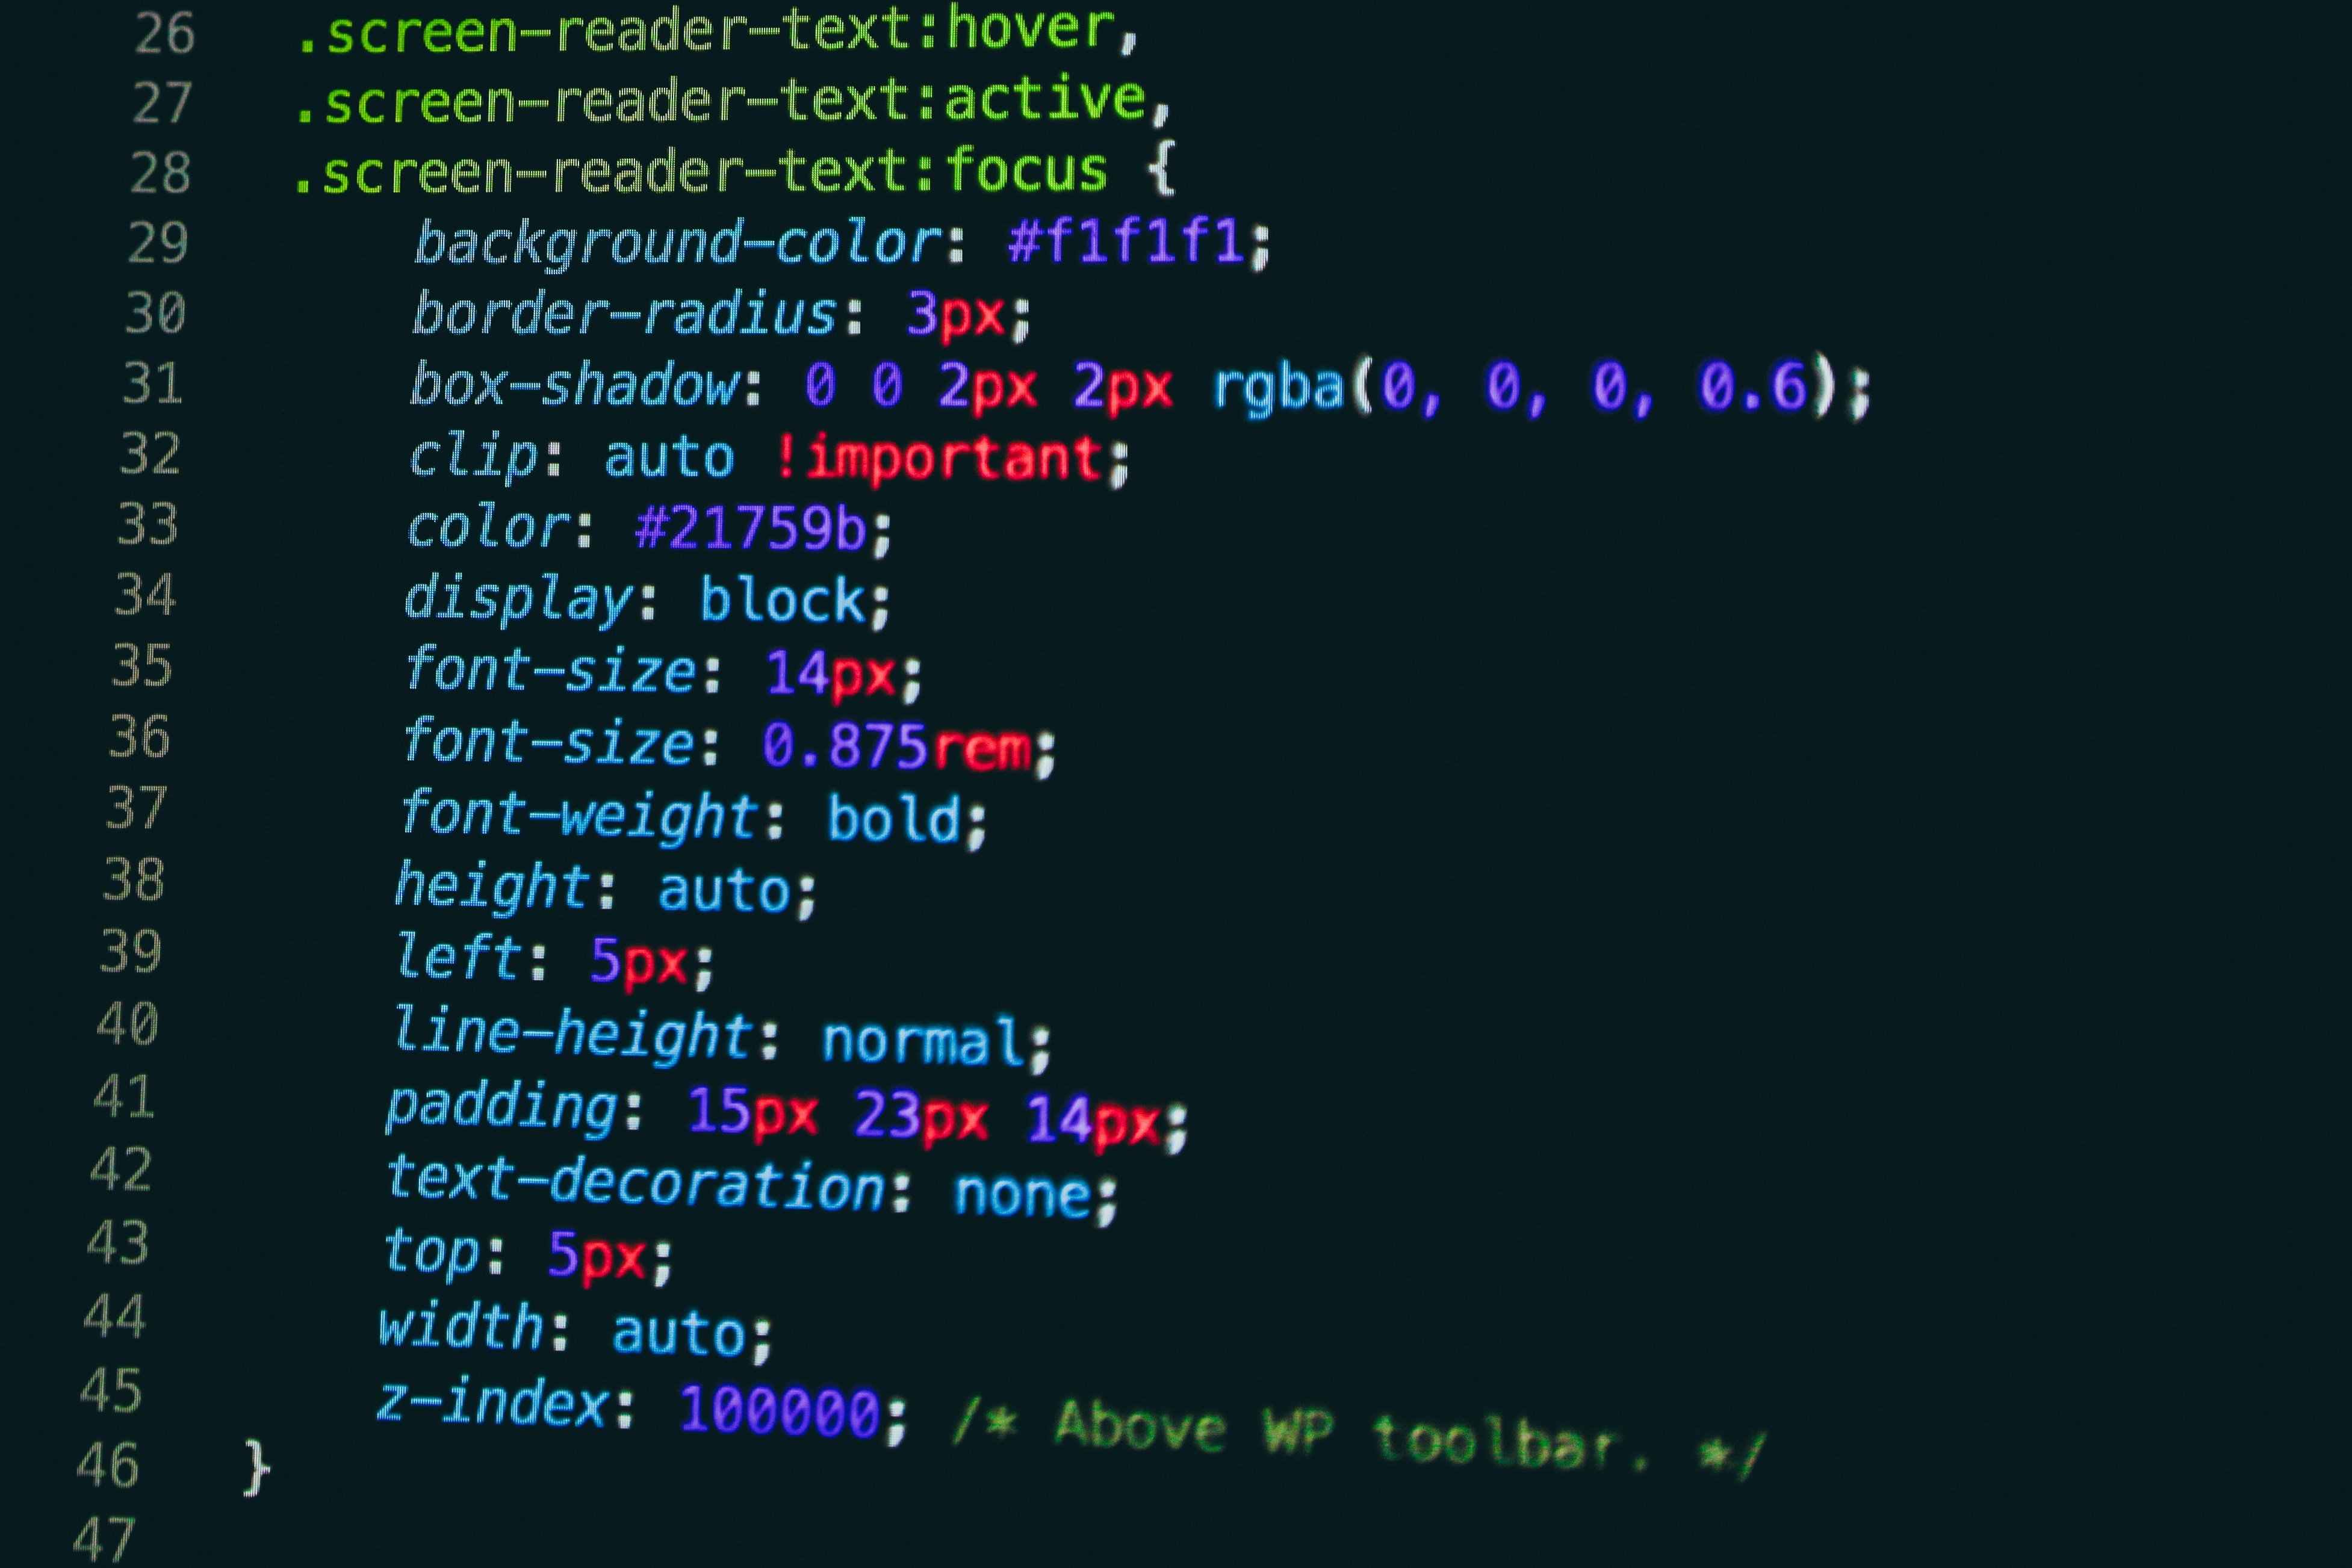 Code editor displaying CSS with syntax highlighting, emphasizing the .screen-reader class. This image reflects the backend customization often seen in web development, similar to rendering templates with Jinja2 in Flask.